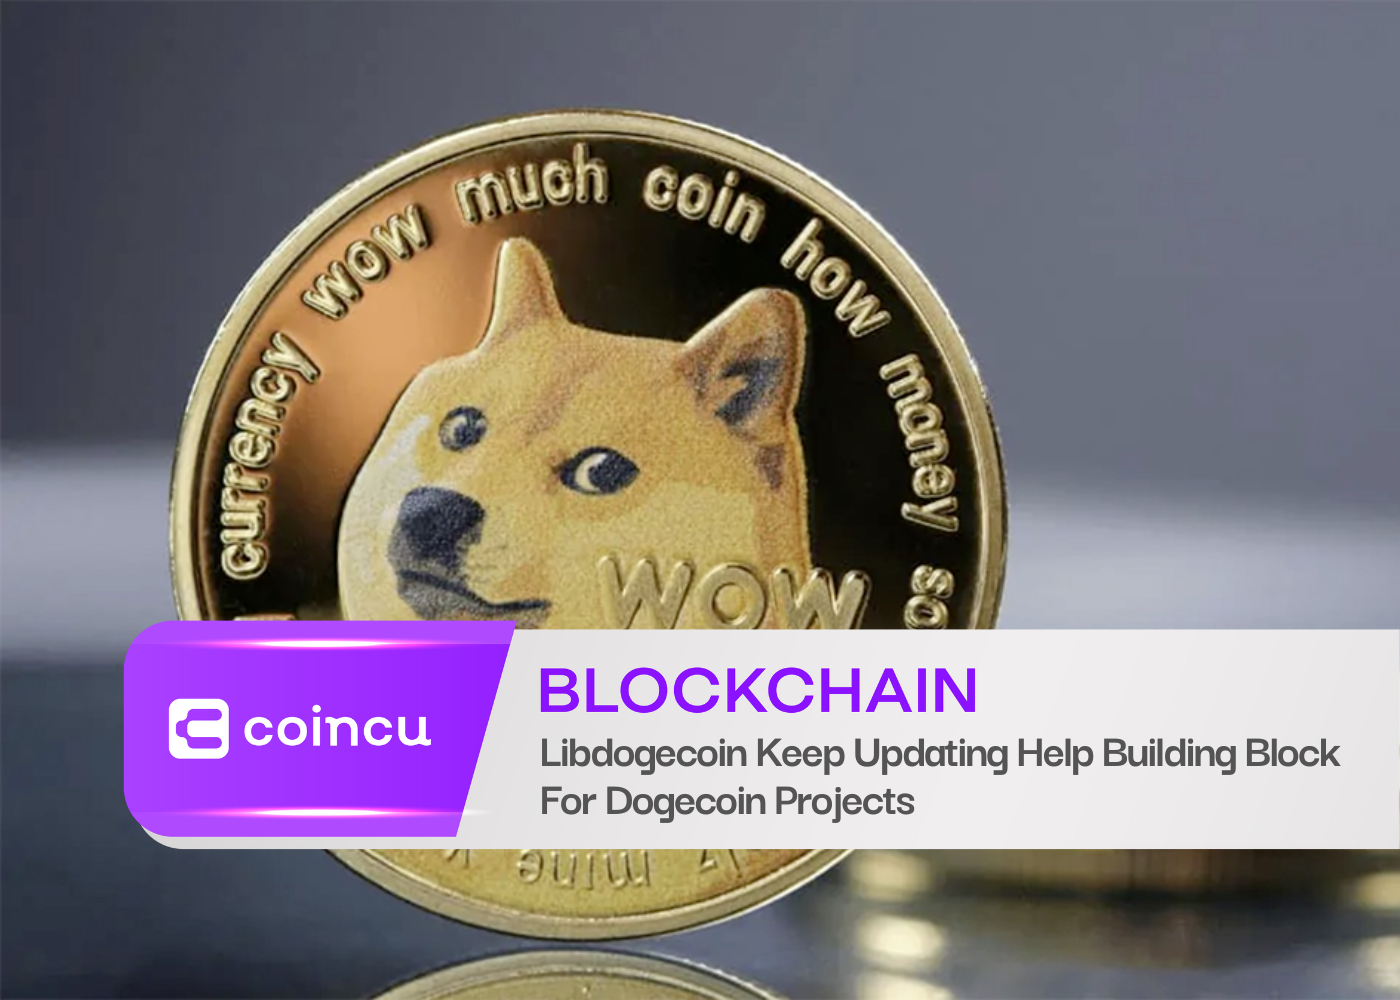 Libdogecoin Keep Updating Help Building Block For Dogecoin Projects